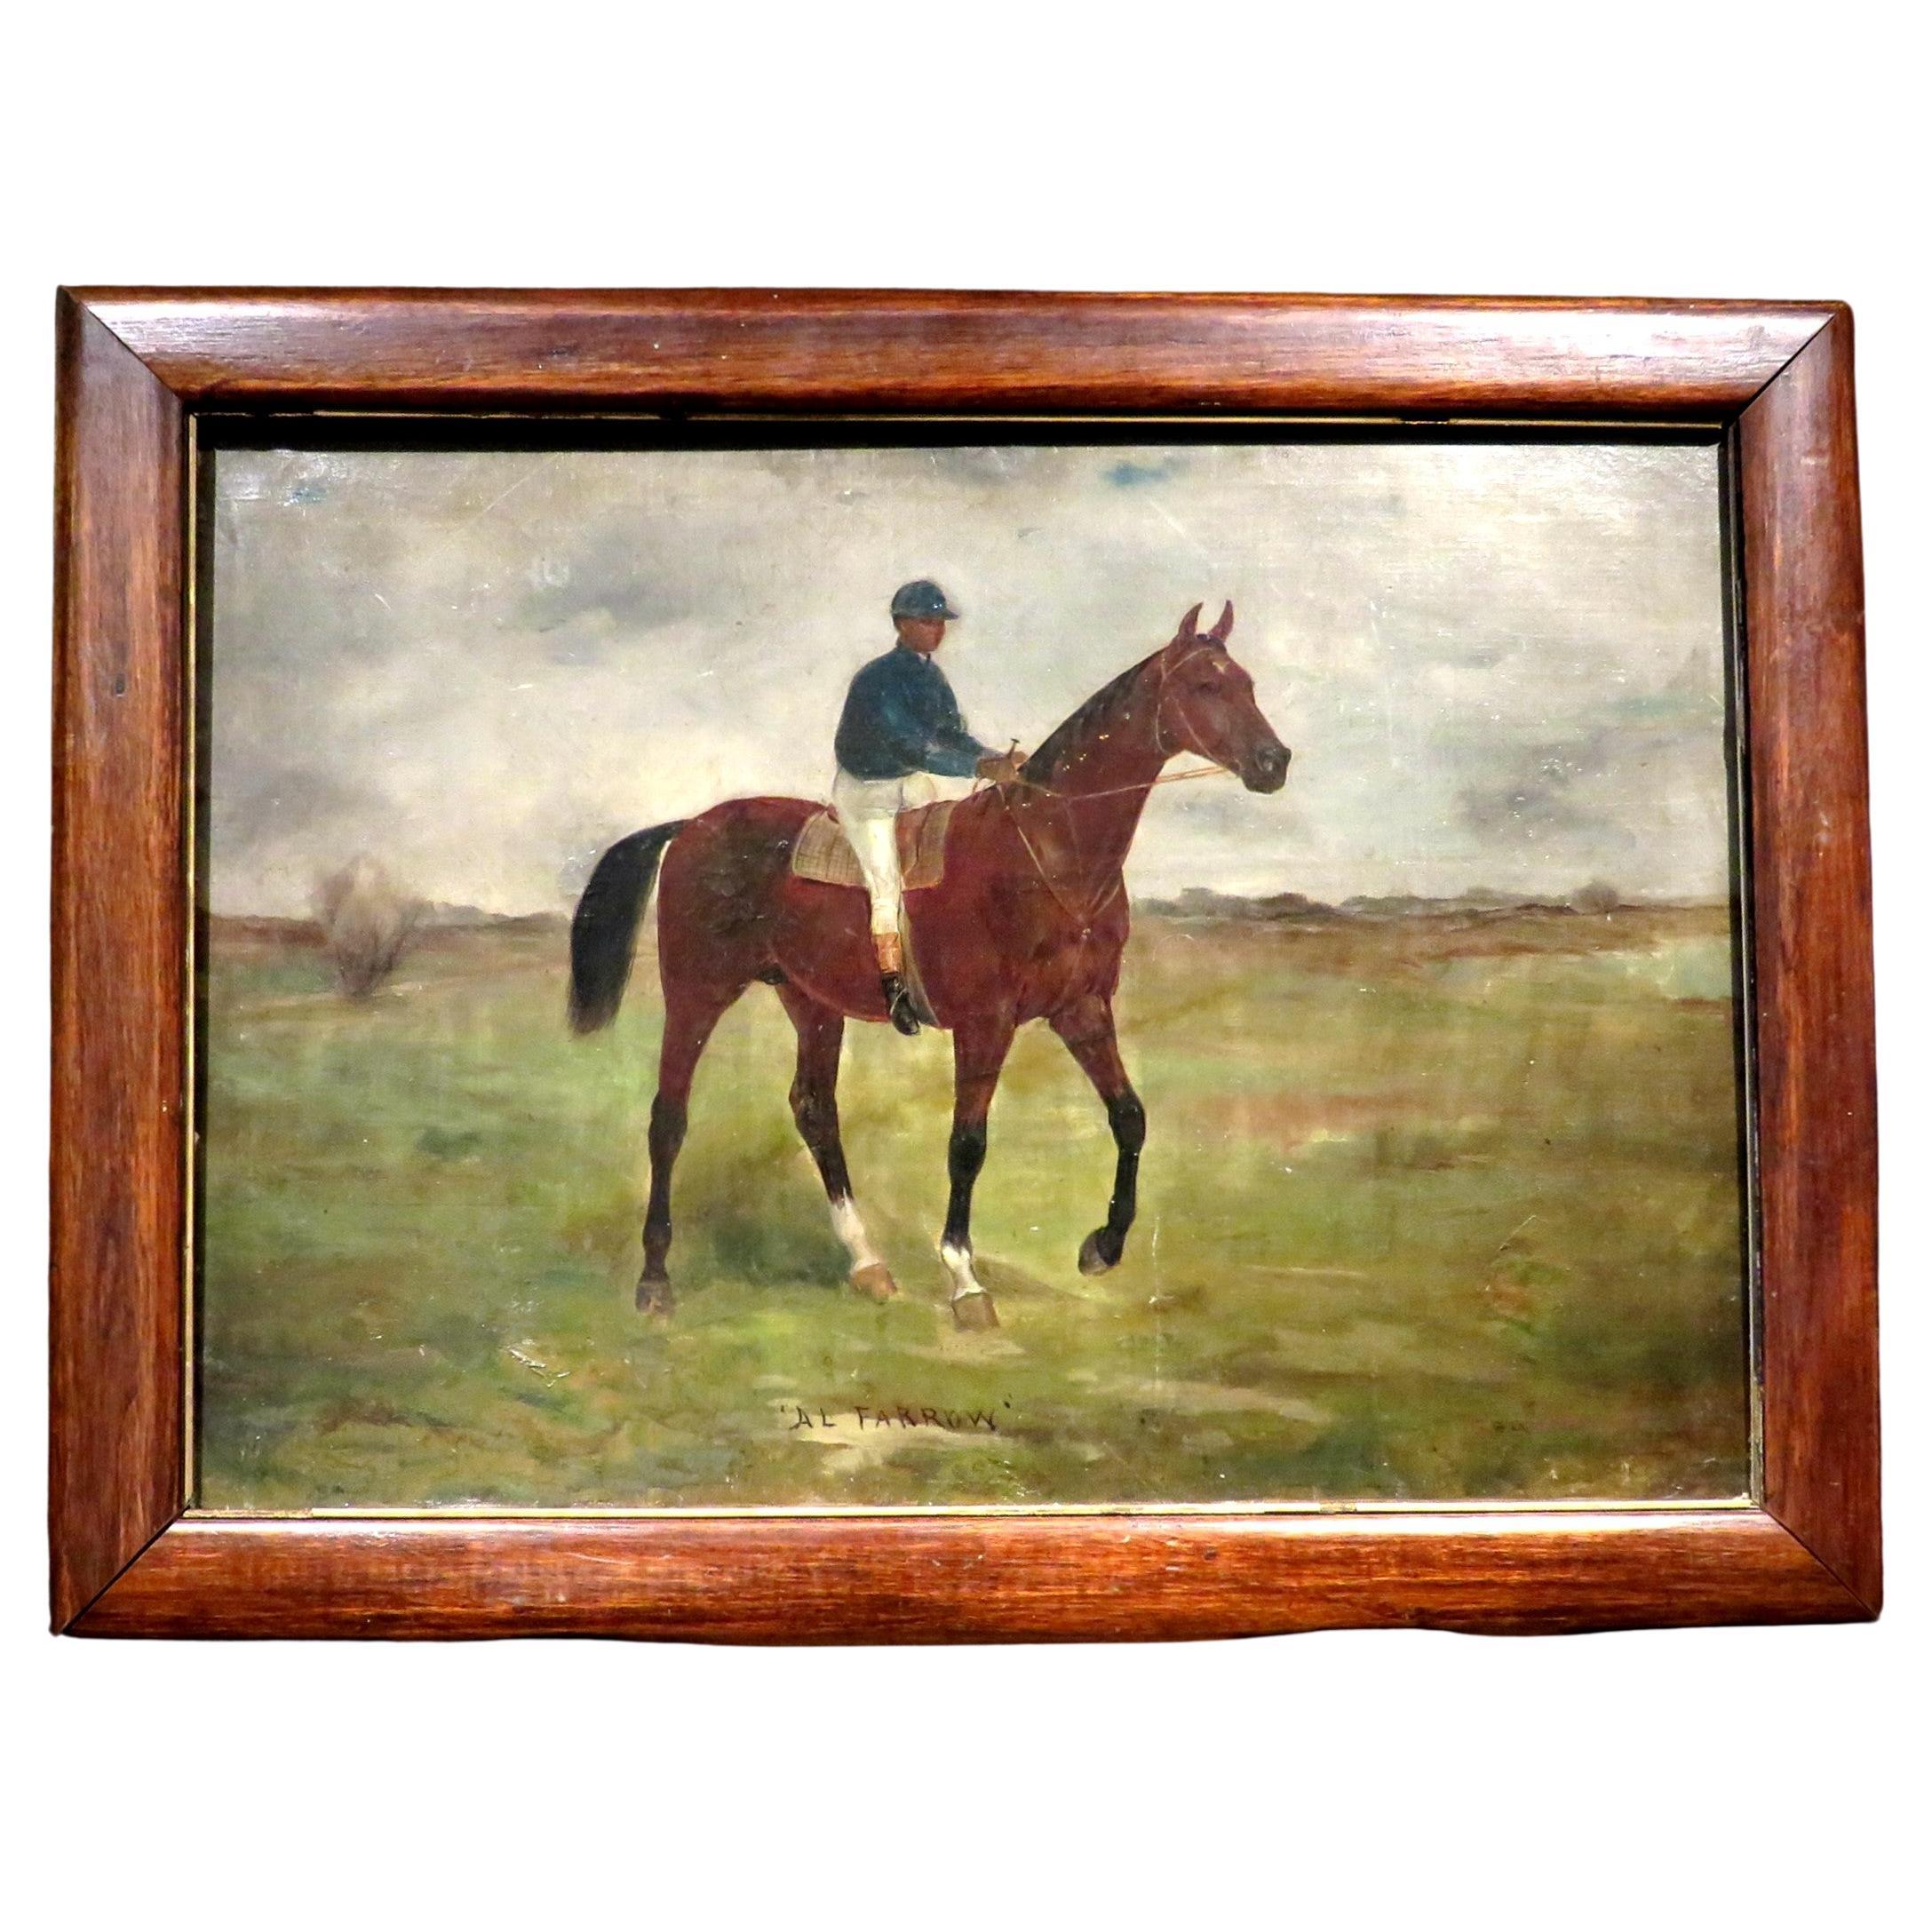 A 19th Century Equestrian Sporting Painting Titled 'Al Farrow' by Gean Smith For Sale